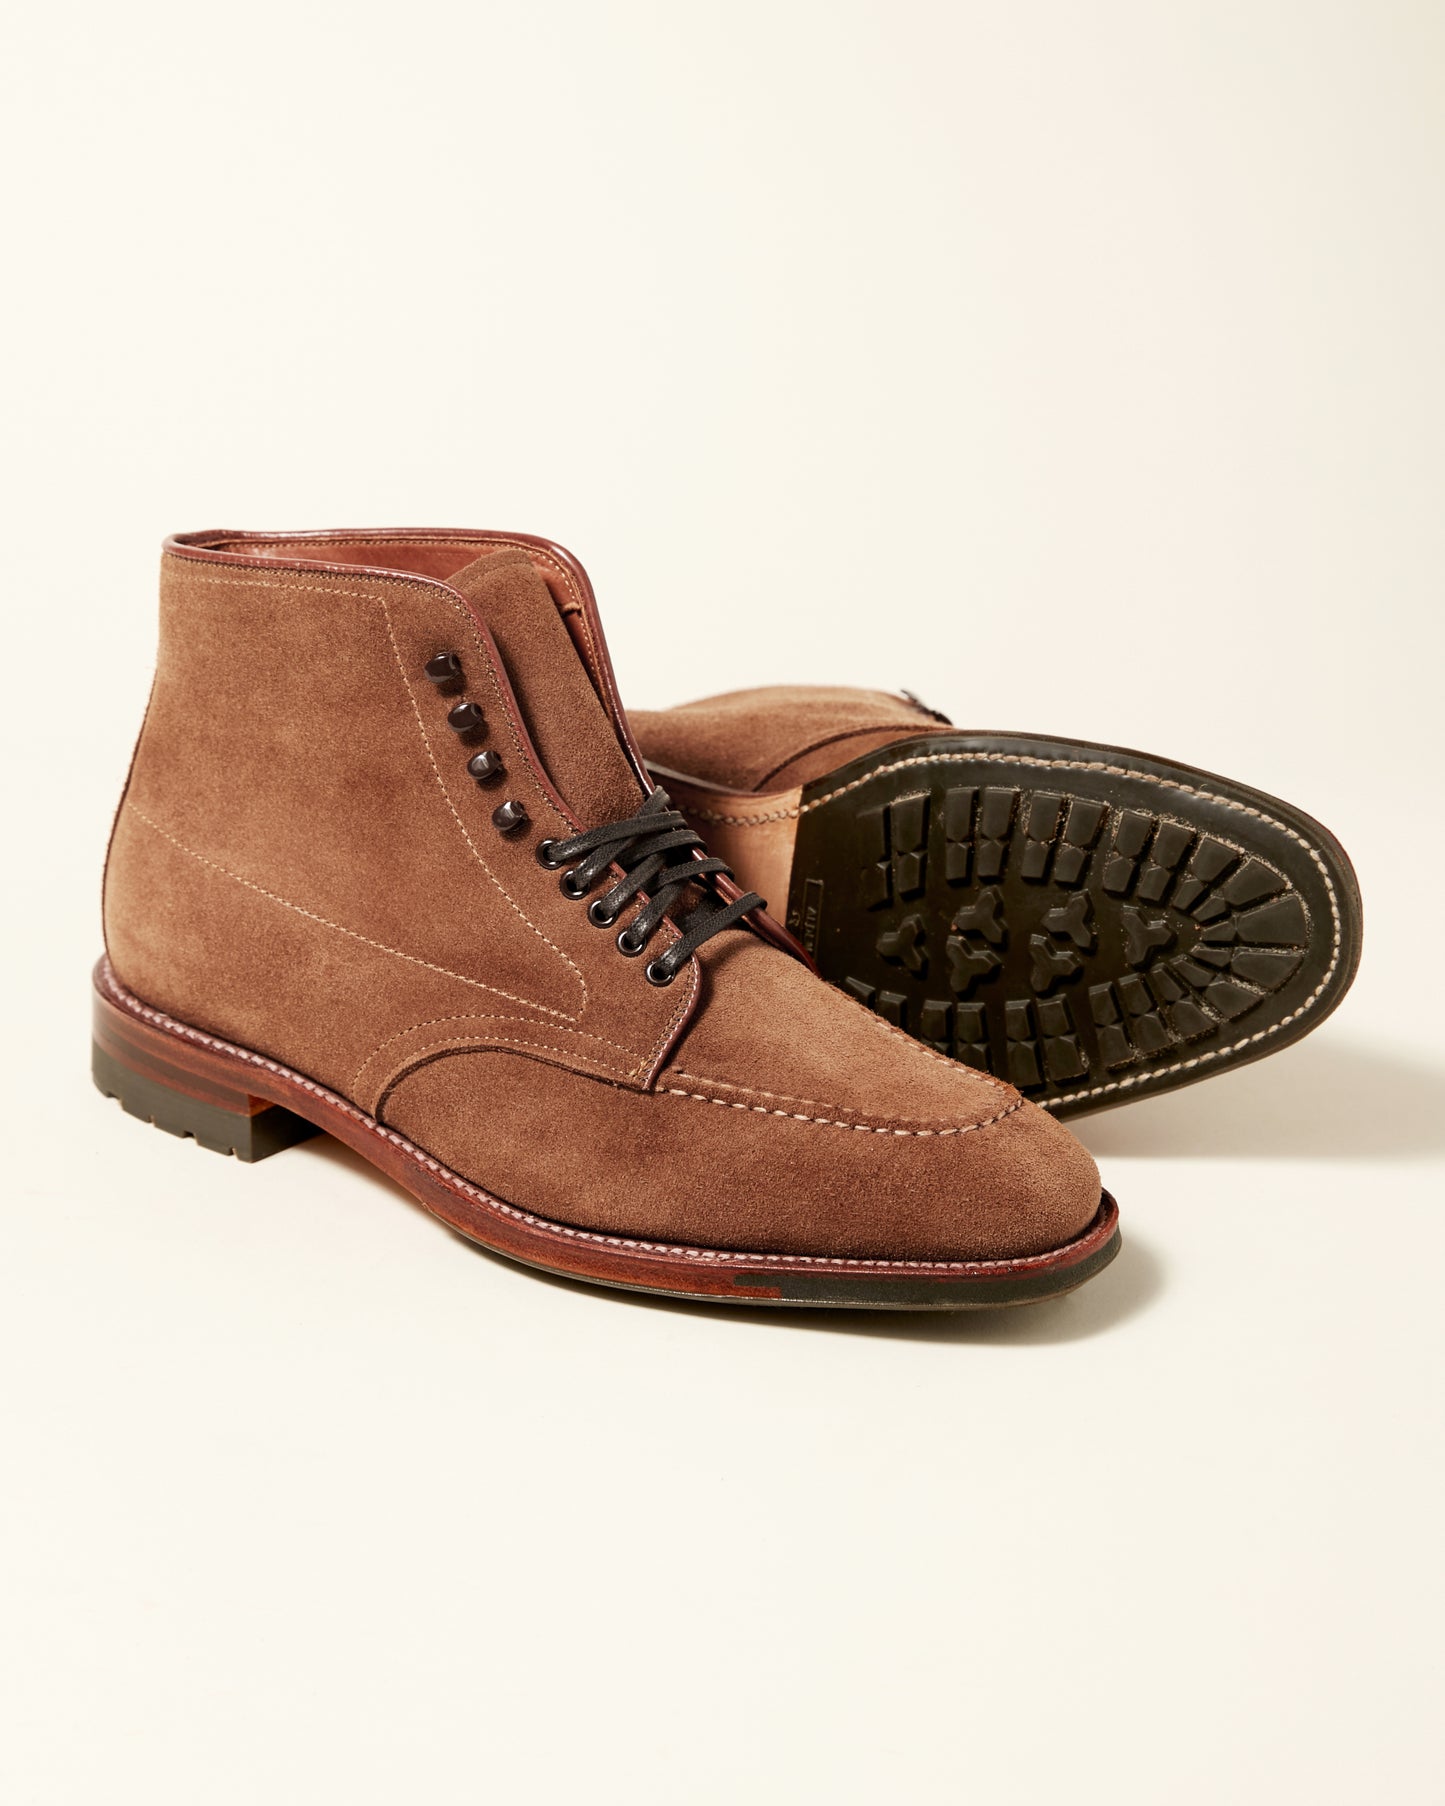 "Denny" Indy Boot in Snuff Suede, Plaza Last